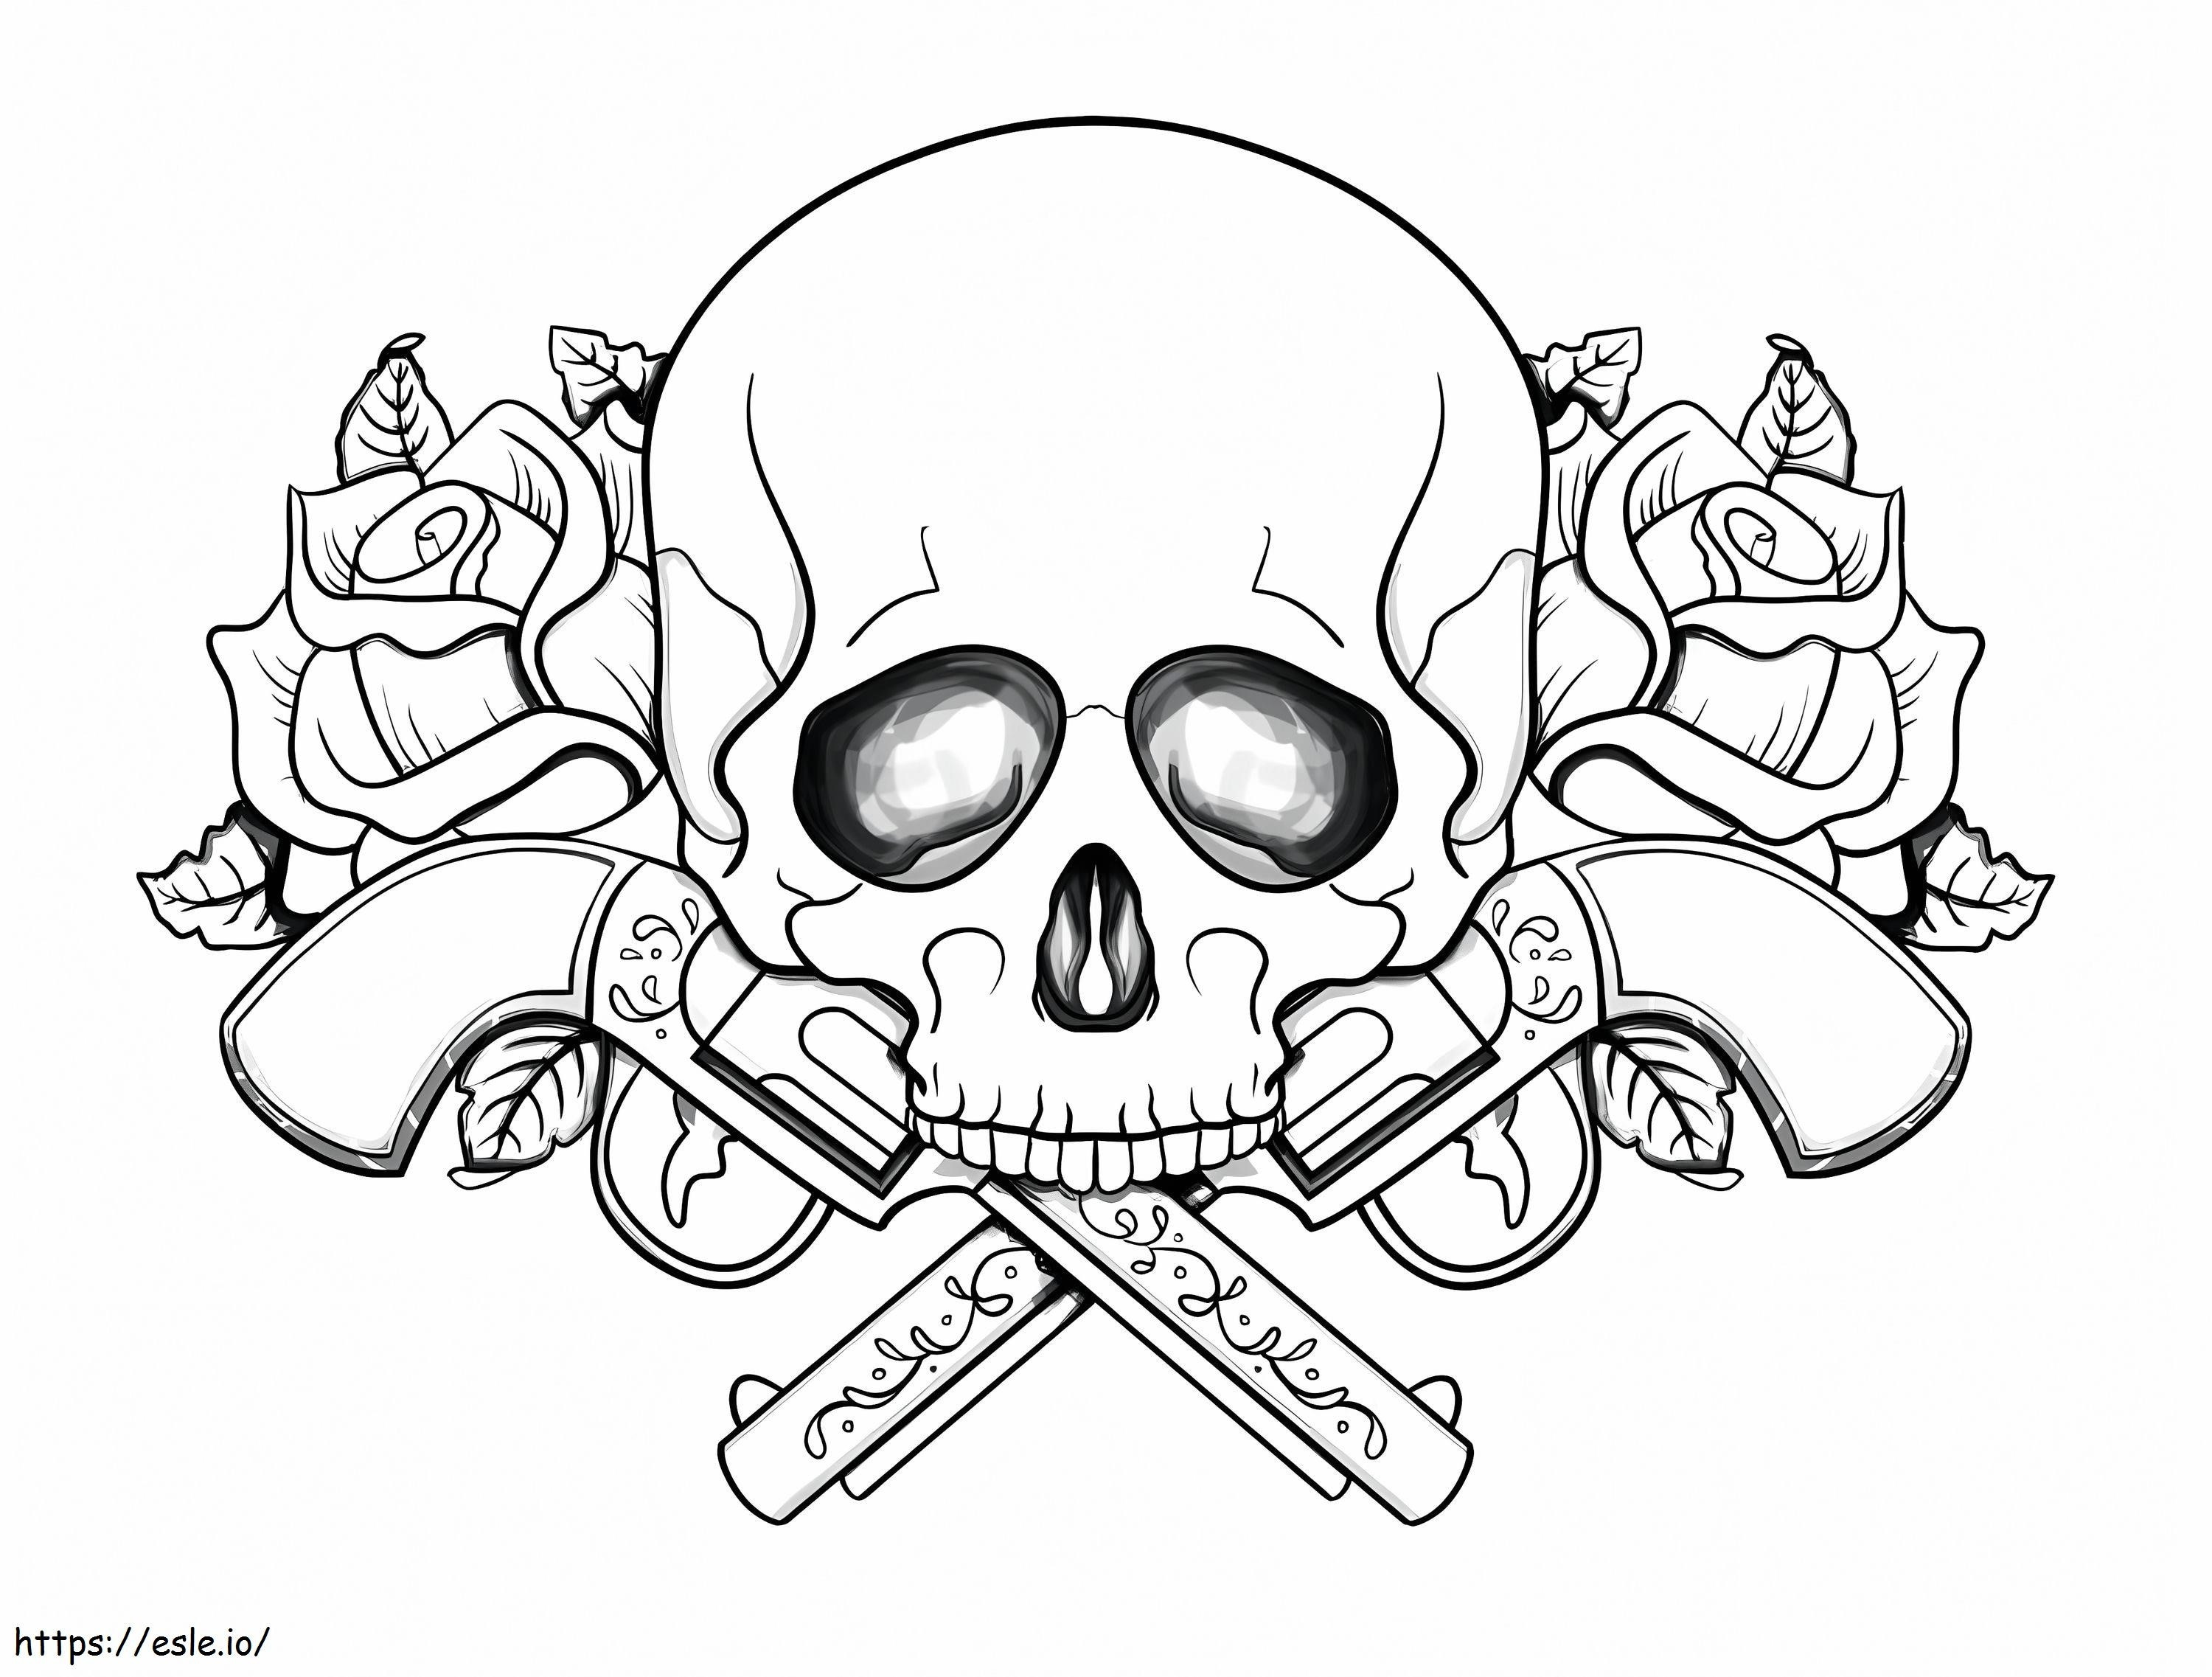 Skull With Two Guns coloring page